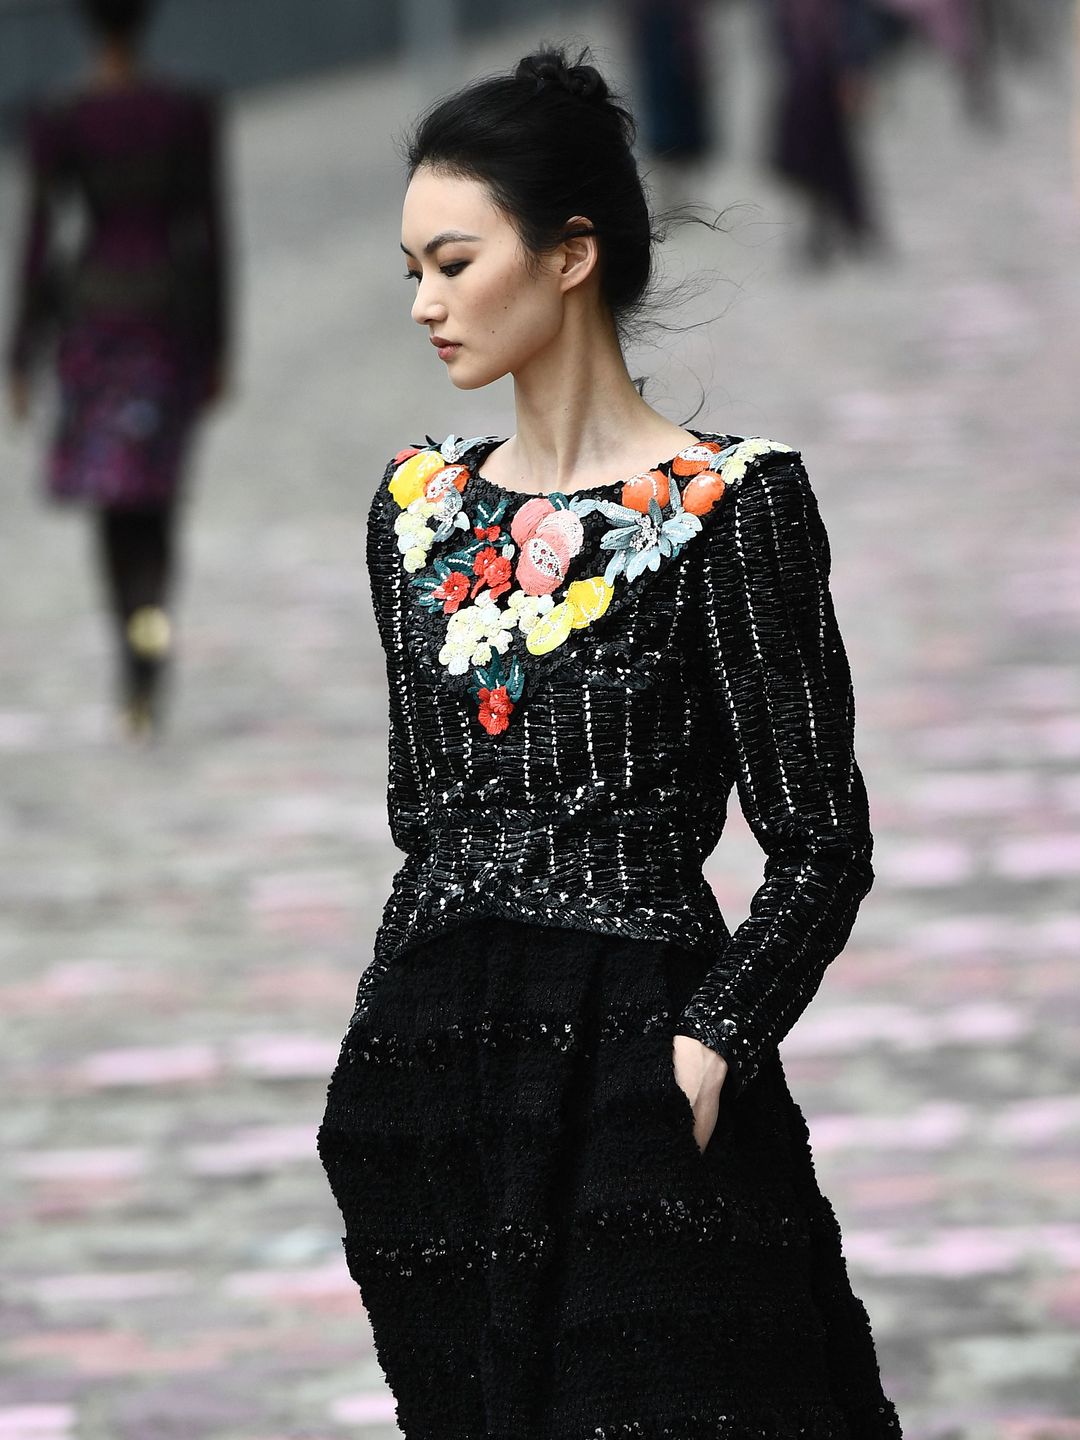 Chanel model wearing black blouse with vibrant embellishment 